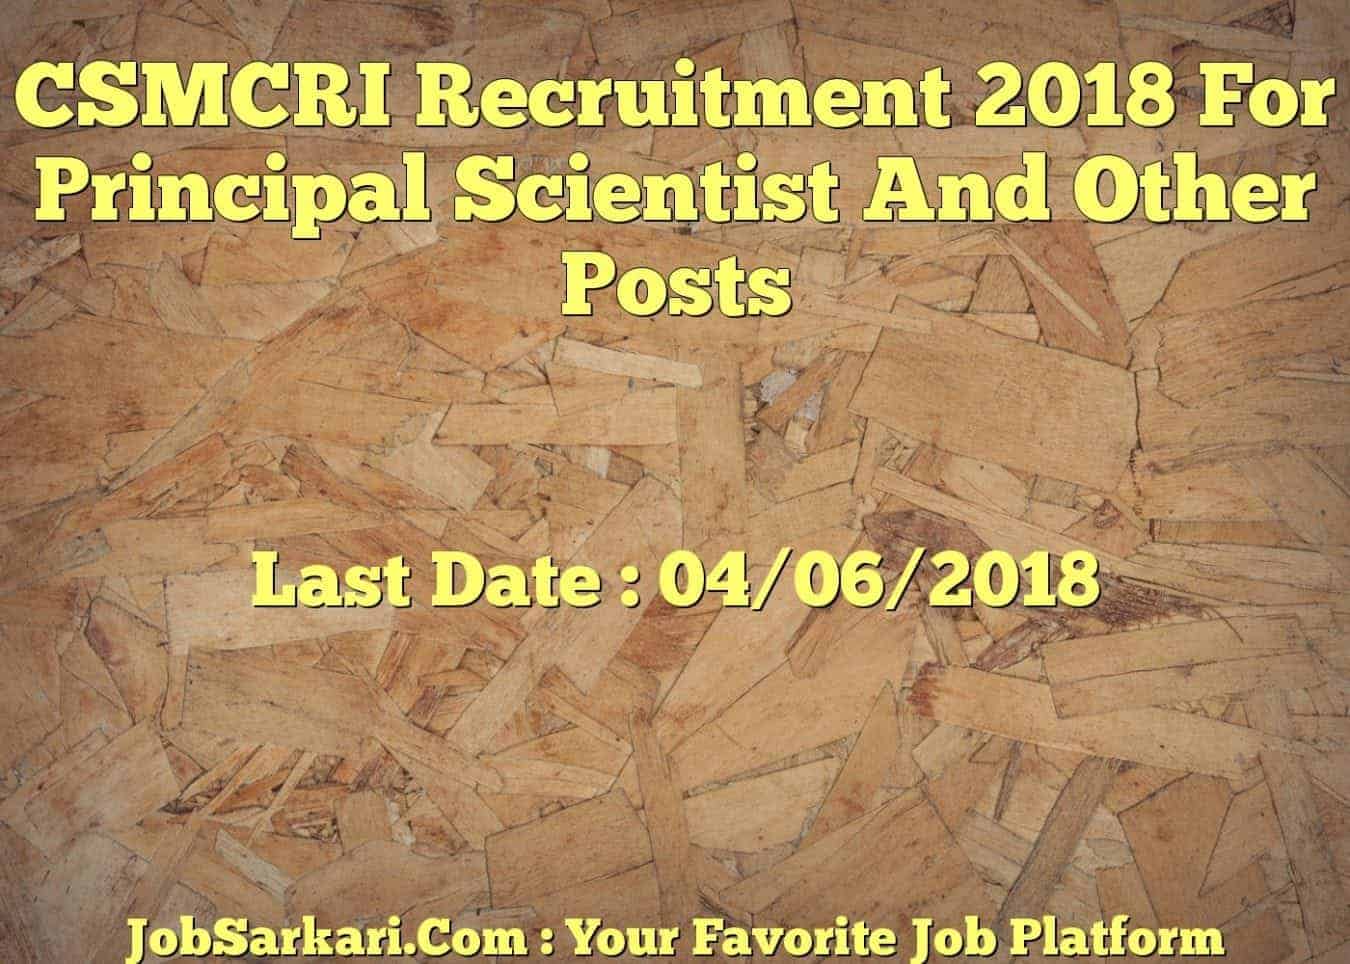 CSMCRI Recruitment 2018 For Principal Scientist And Other Posts